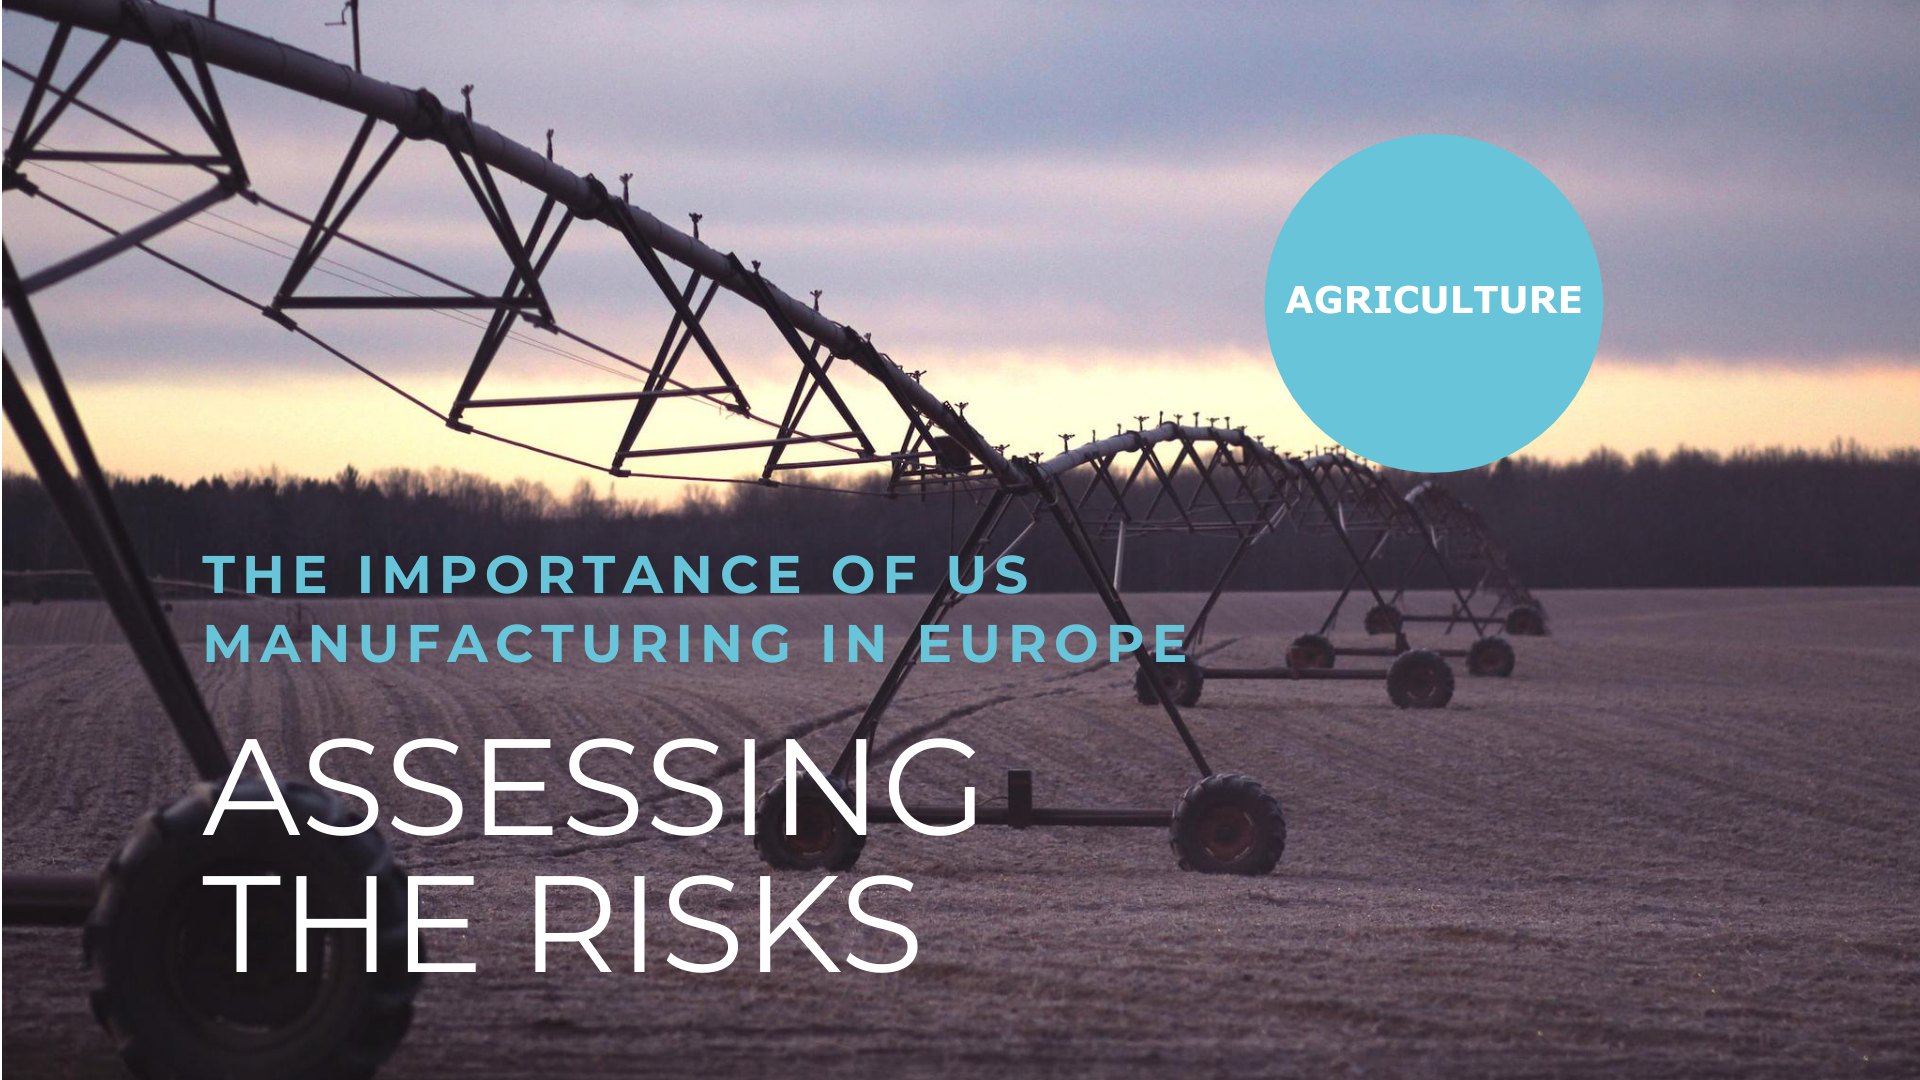 manufacturing in europe, european crisis, reducing dependancy, agriculture in europe